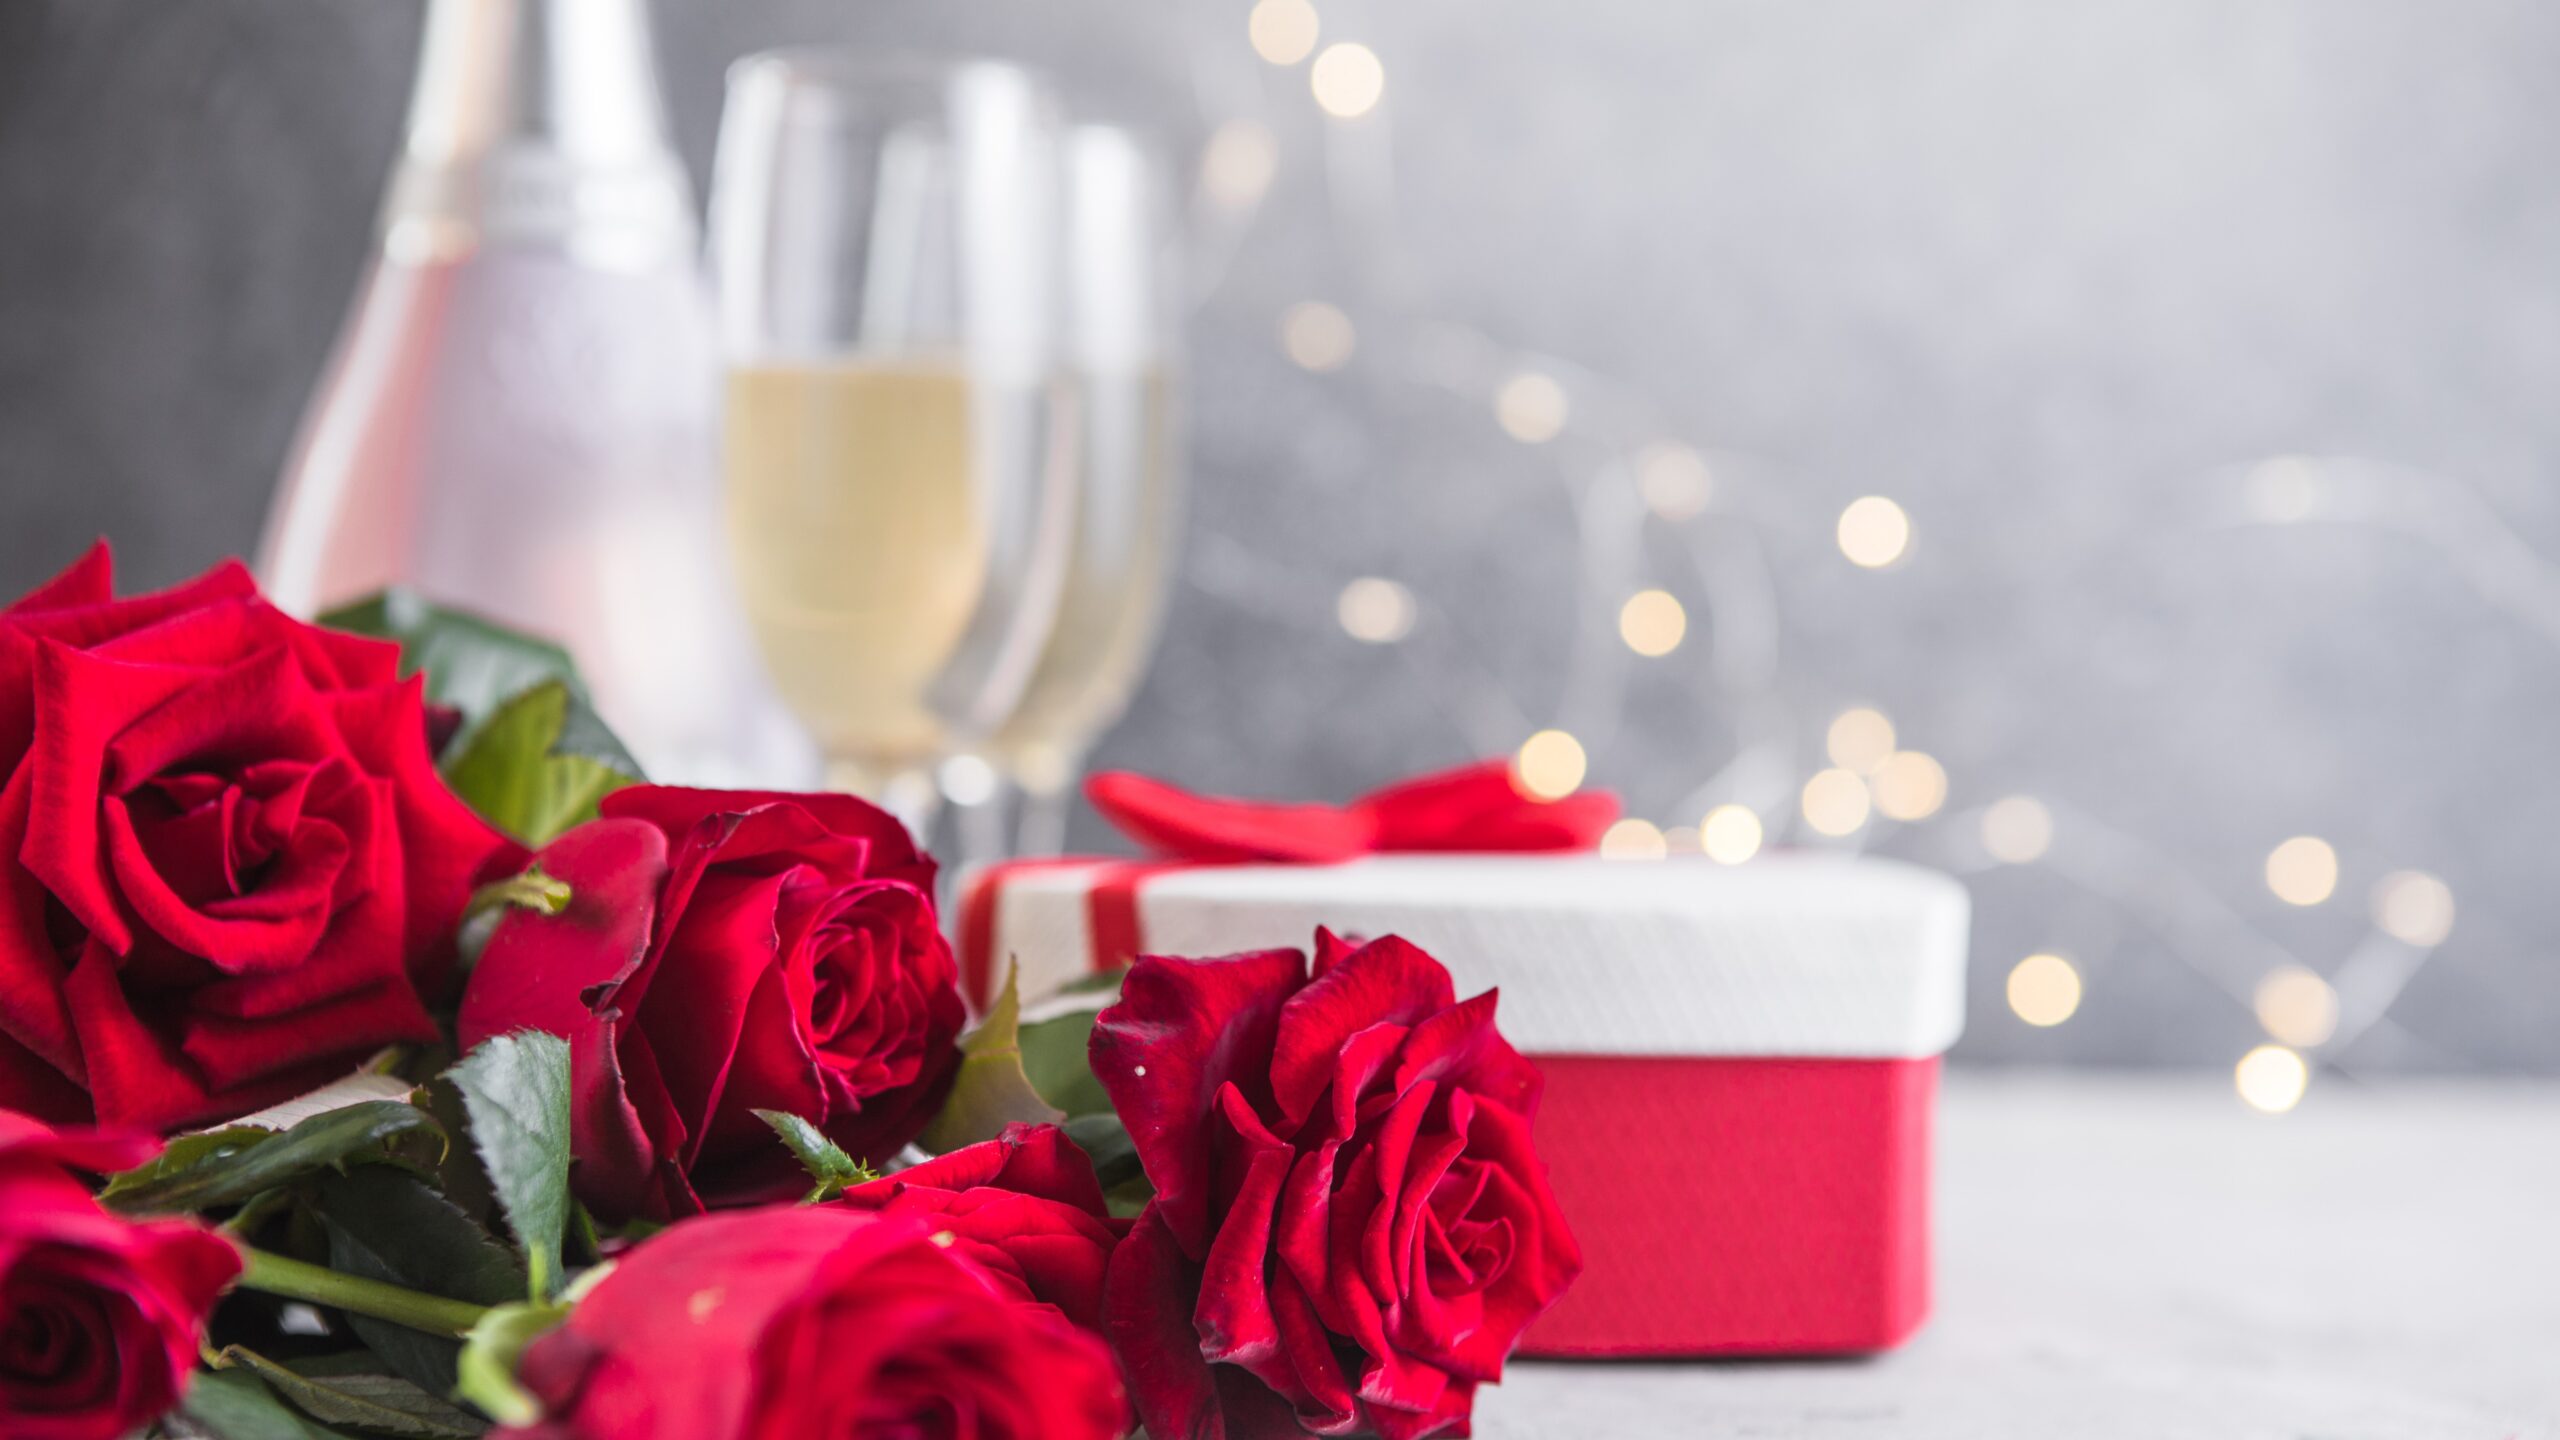 champagne-and-red-roses-with-bokeh-valentine-s-se-2023-01-17-05-09-16-utc